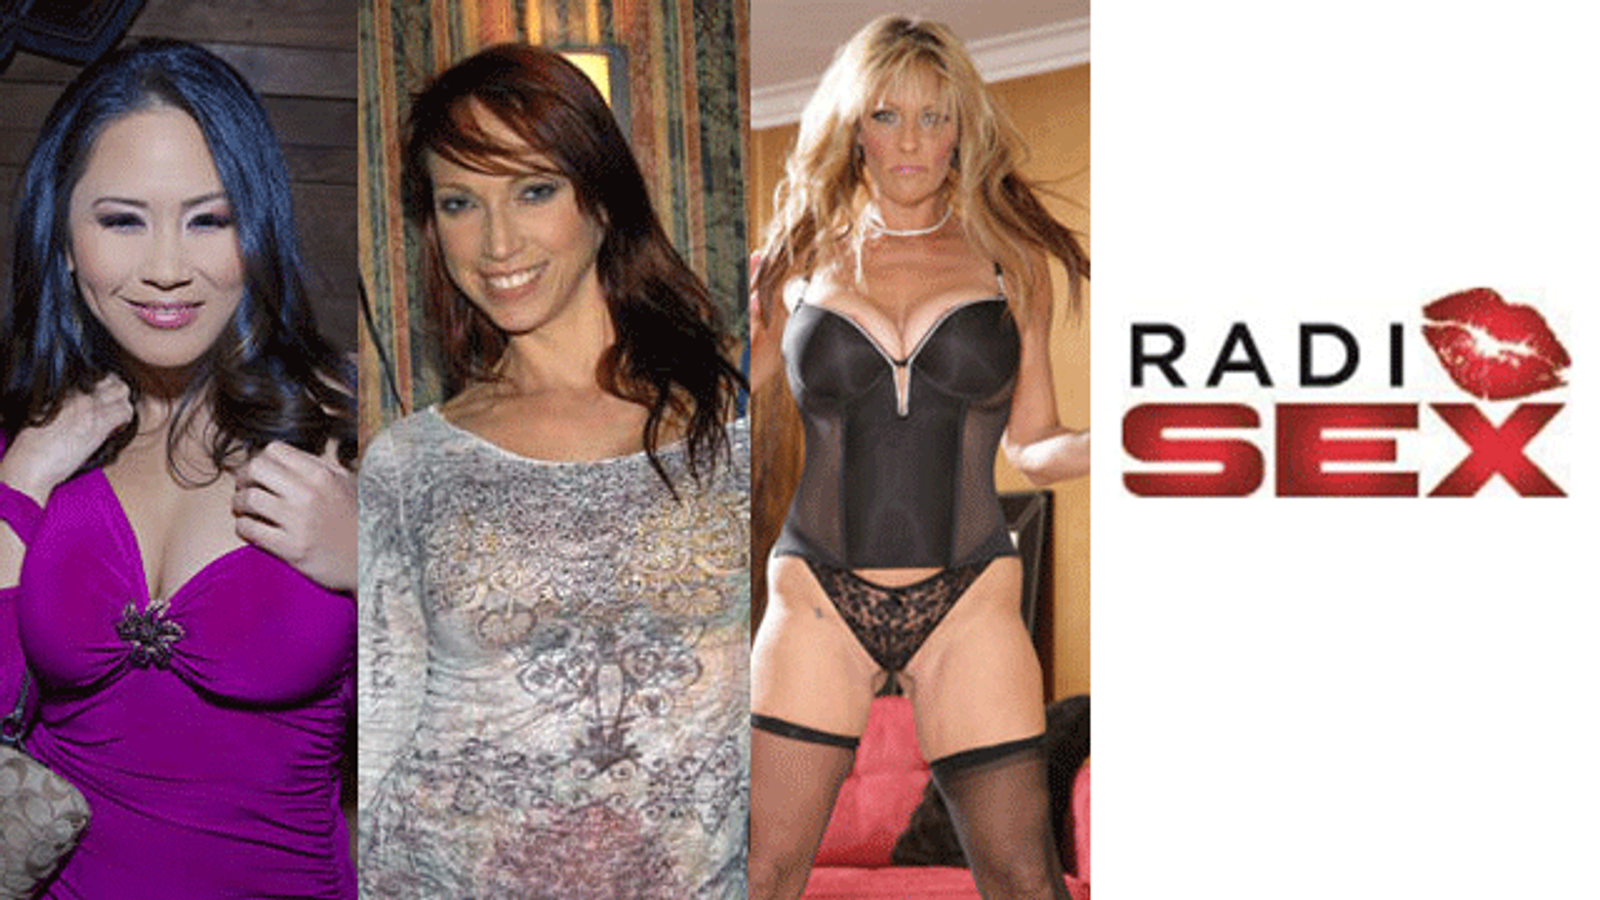 Radio Sex Fires Several Hosts Over On-Air Sex--UPDATED